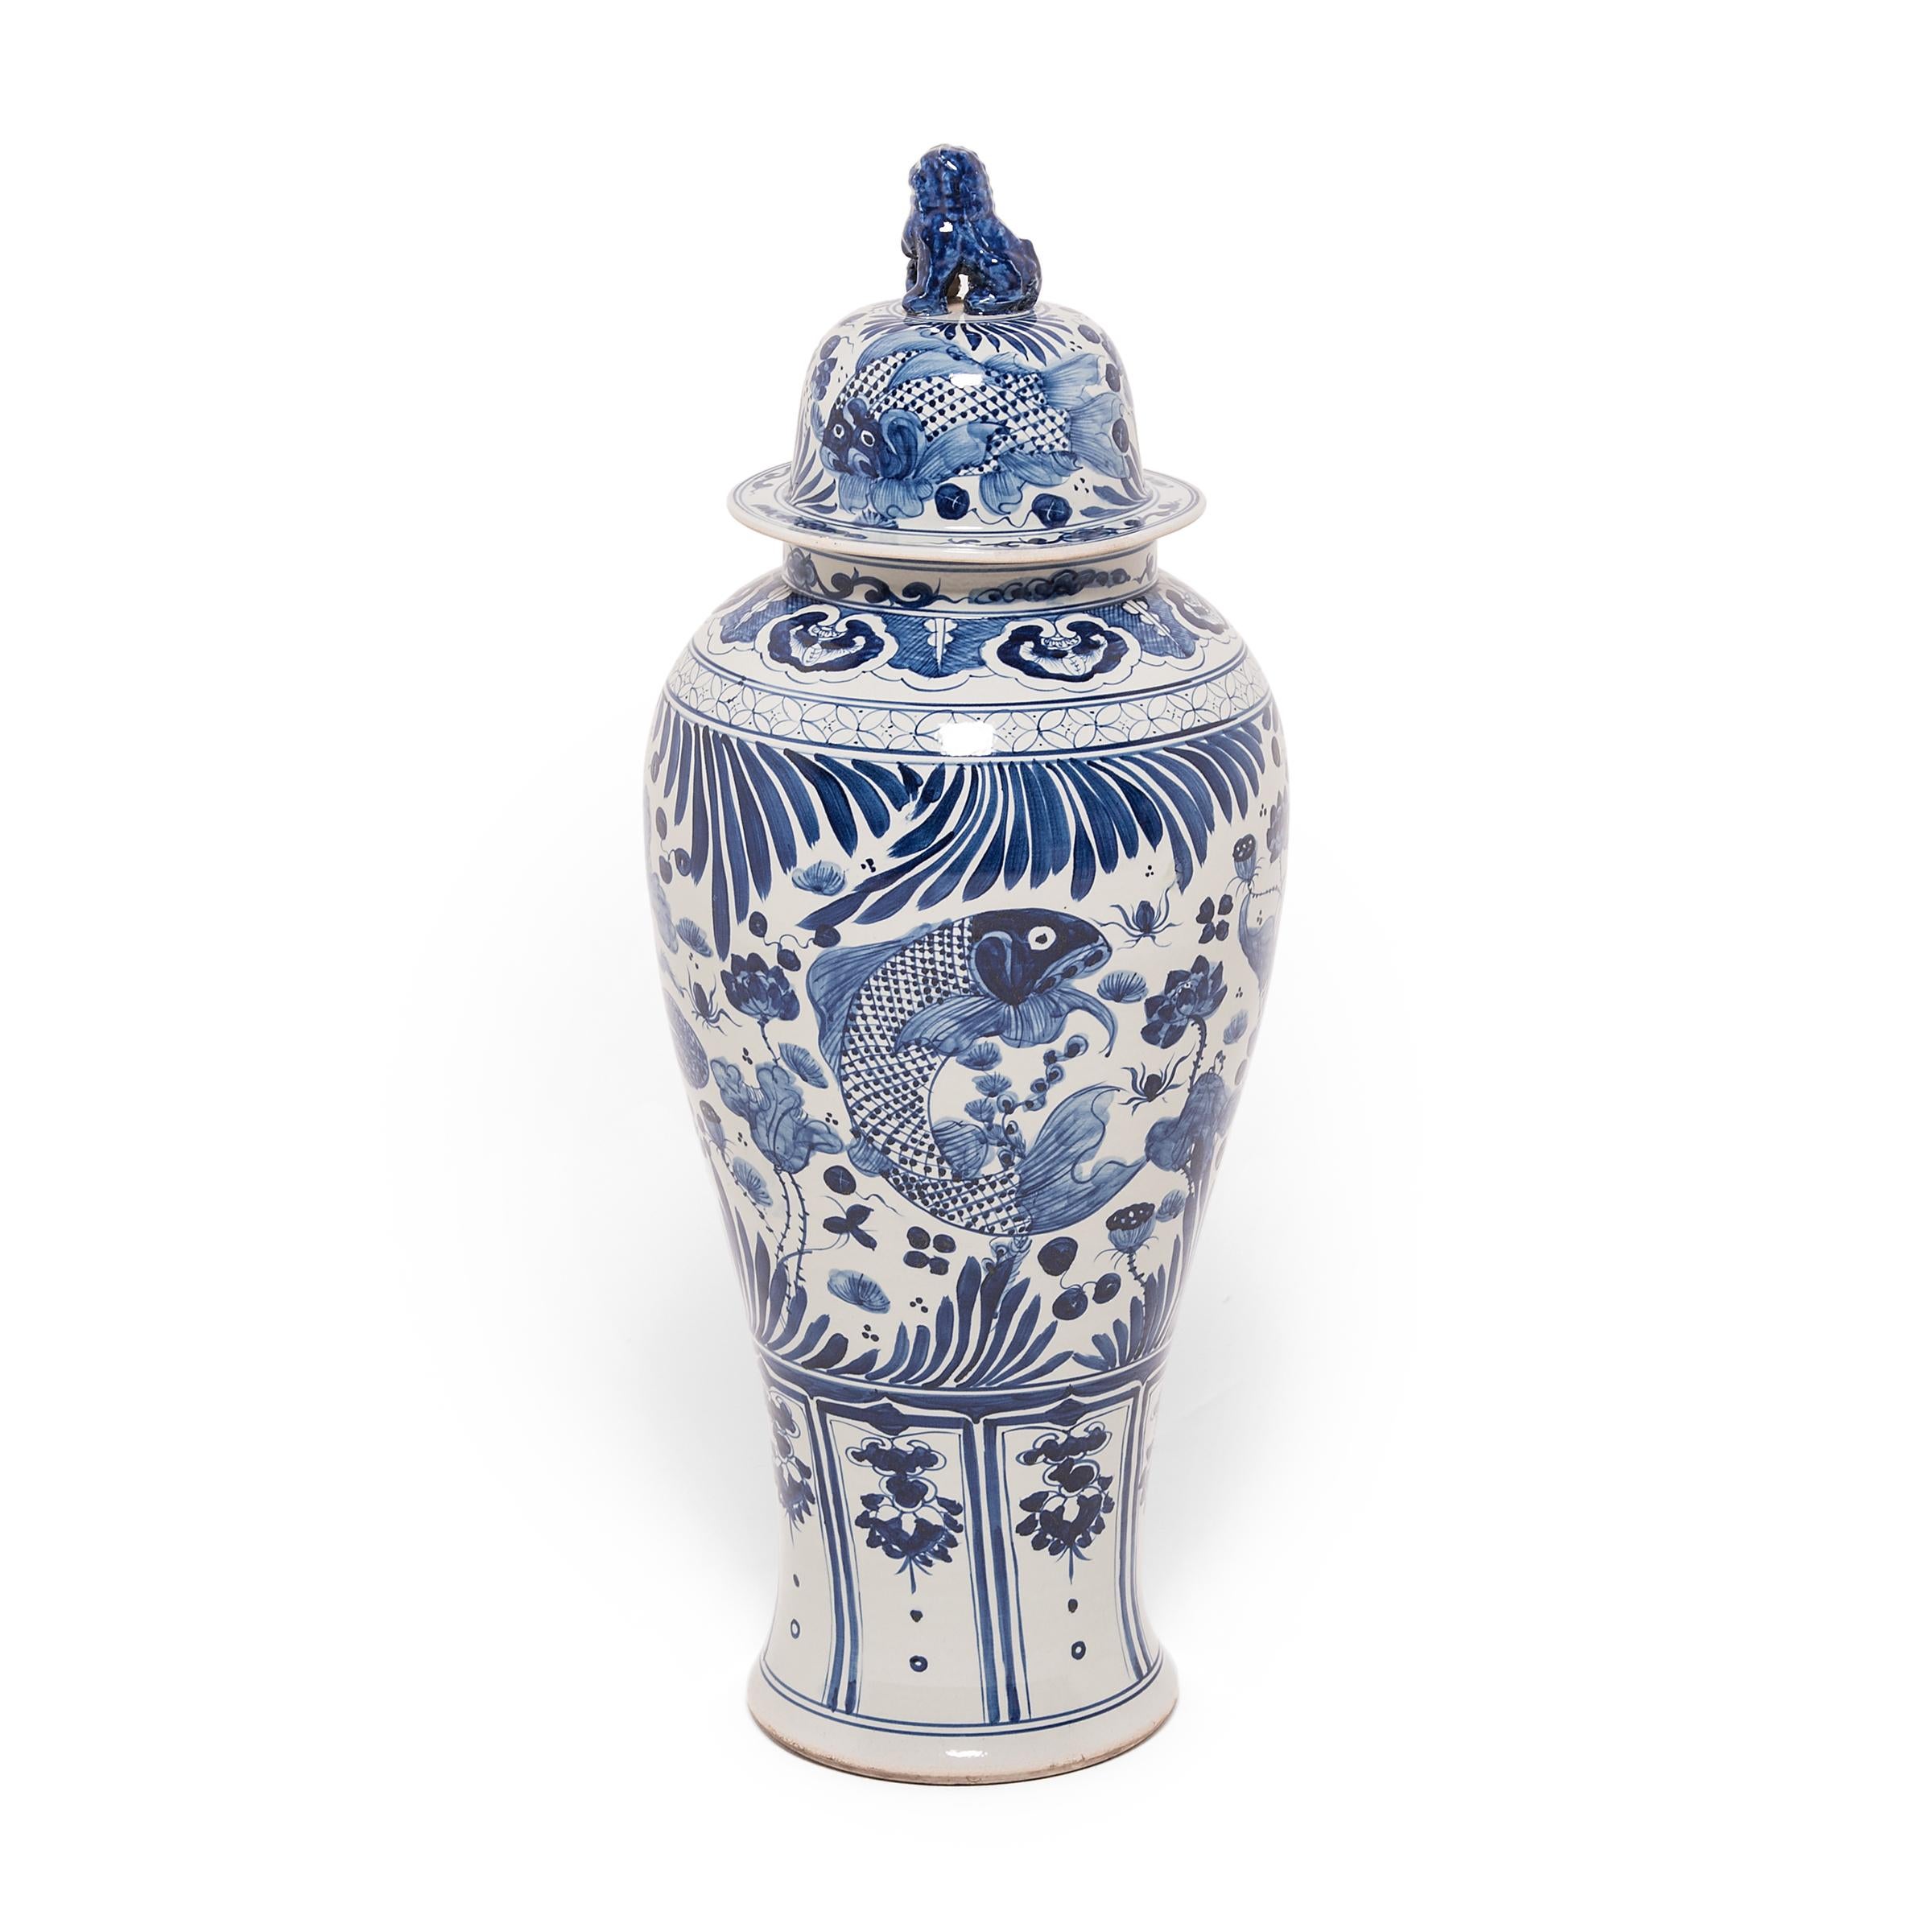 These grand, blue-and-white porcelain jars are hand-painted with flora and fauna of the sea, offering blessings of wealth, abundance, the content harmony of a fish in water. Chinese blue-and-white ceramics have inspired ceramists worldwide since